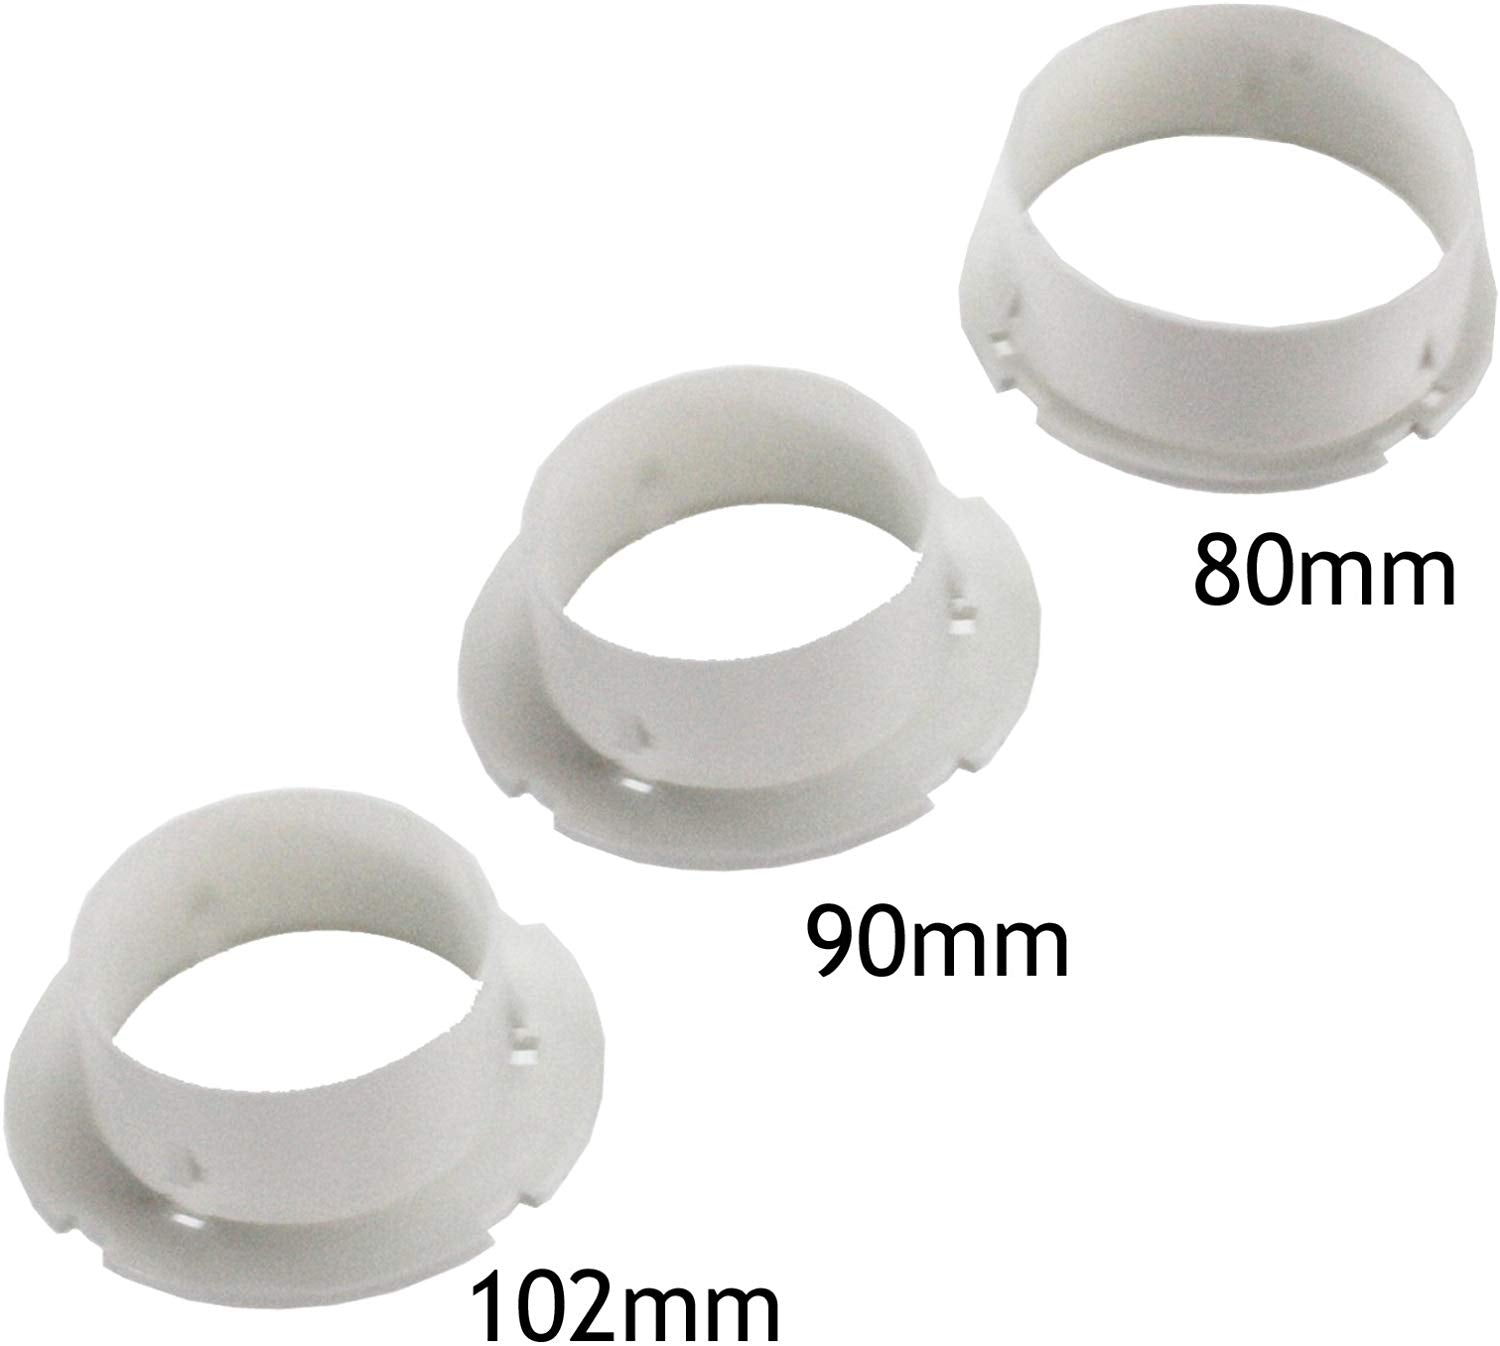 Vent Hose Condenser Kit with 3 x Adapters for Hotpoint Tumble Dryer (1.2m)